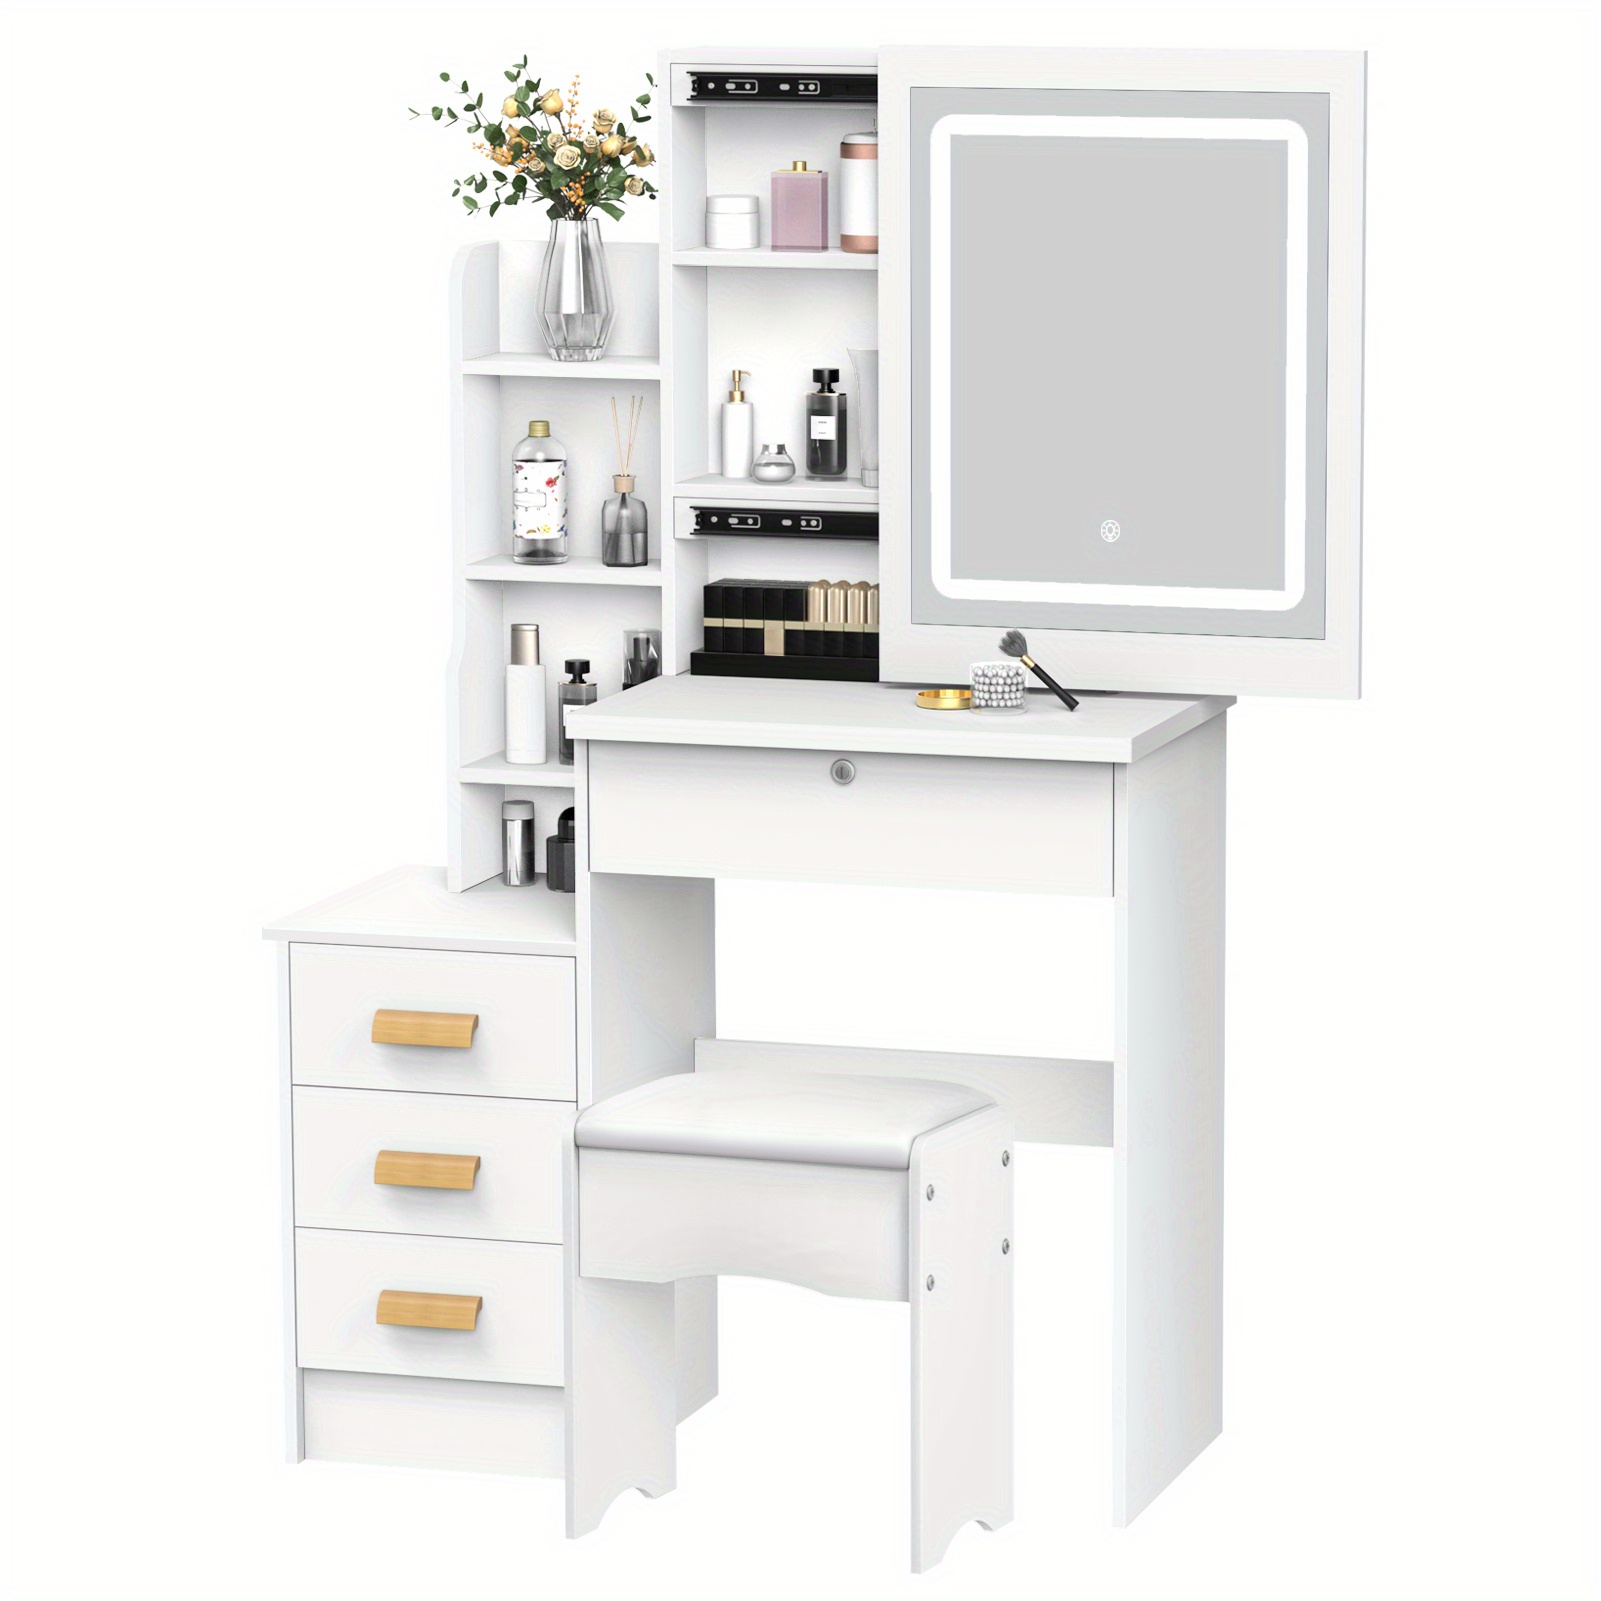 

1 X Dressing Table Dressing Table With Sliding Mirror And Light, Bedroom Dressing Table, Dressing Table With Drawers And Shelves, Hidden Storage 31.5"x15.75"x53.15